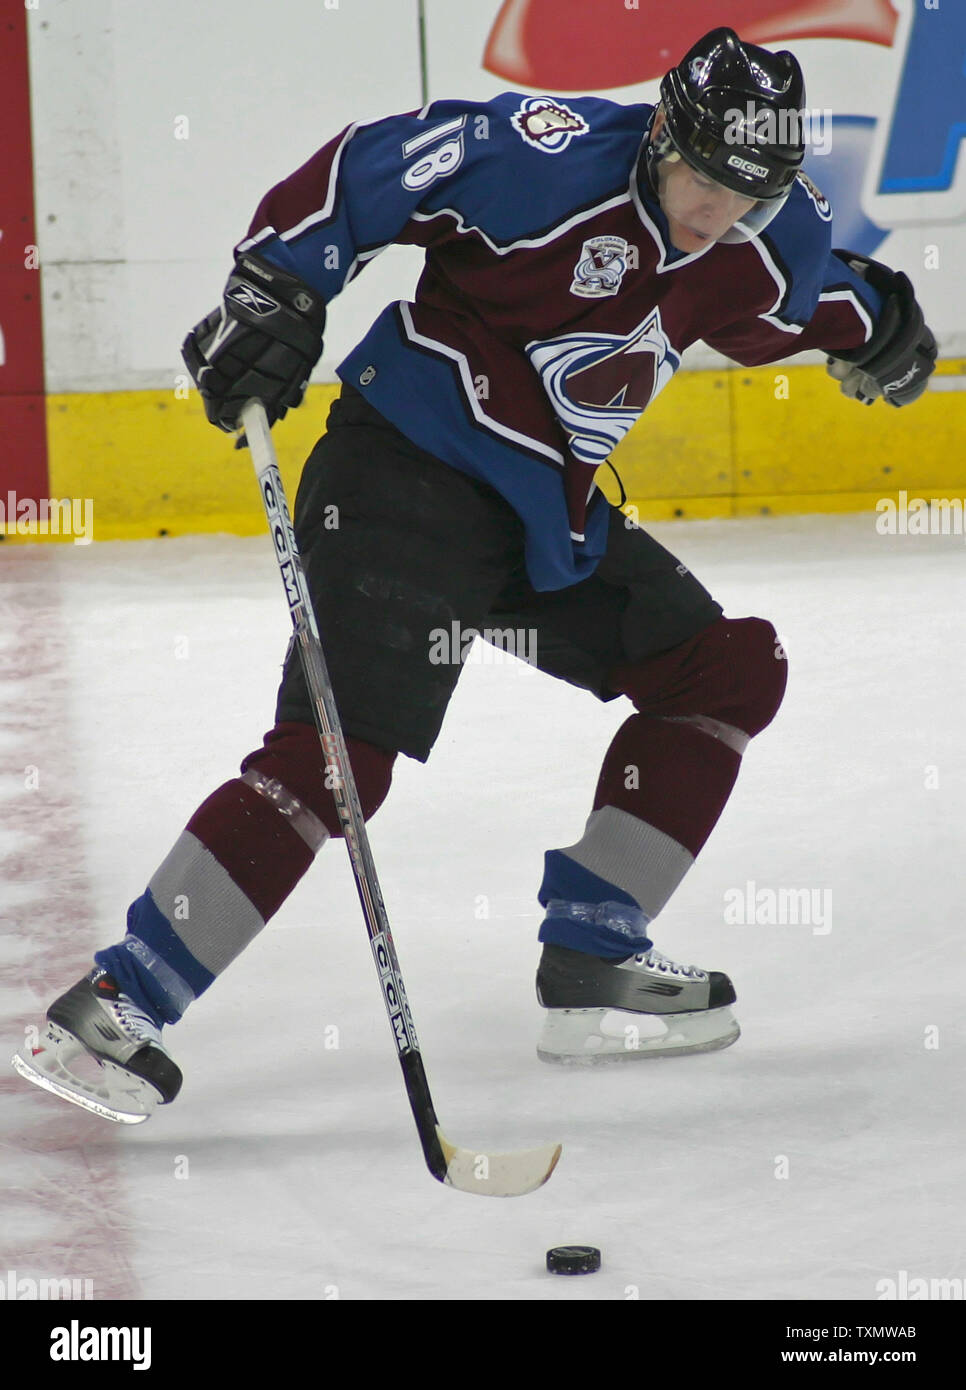 Colorado Avalanche left wing Alex Tanguay gathers in the puck against the  Calgary Flames at the Pepsi Center in Denver March 12, 2006. Tanguay scored  a goal and an assist in the